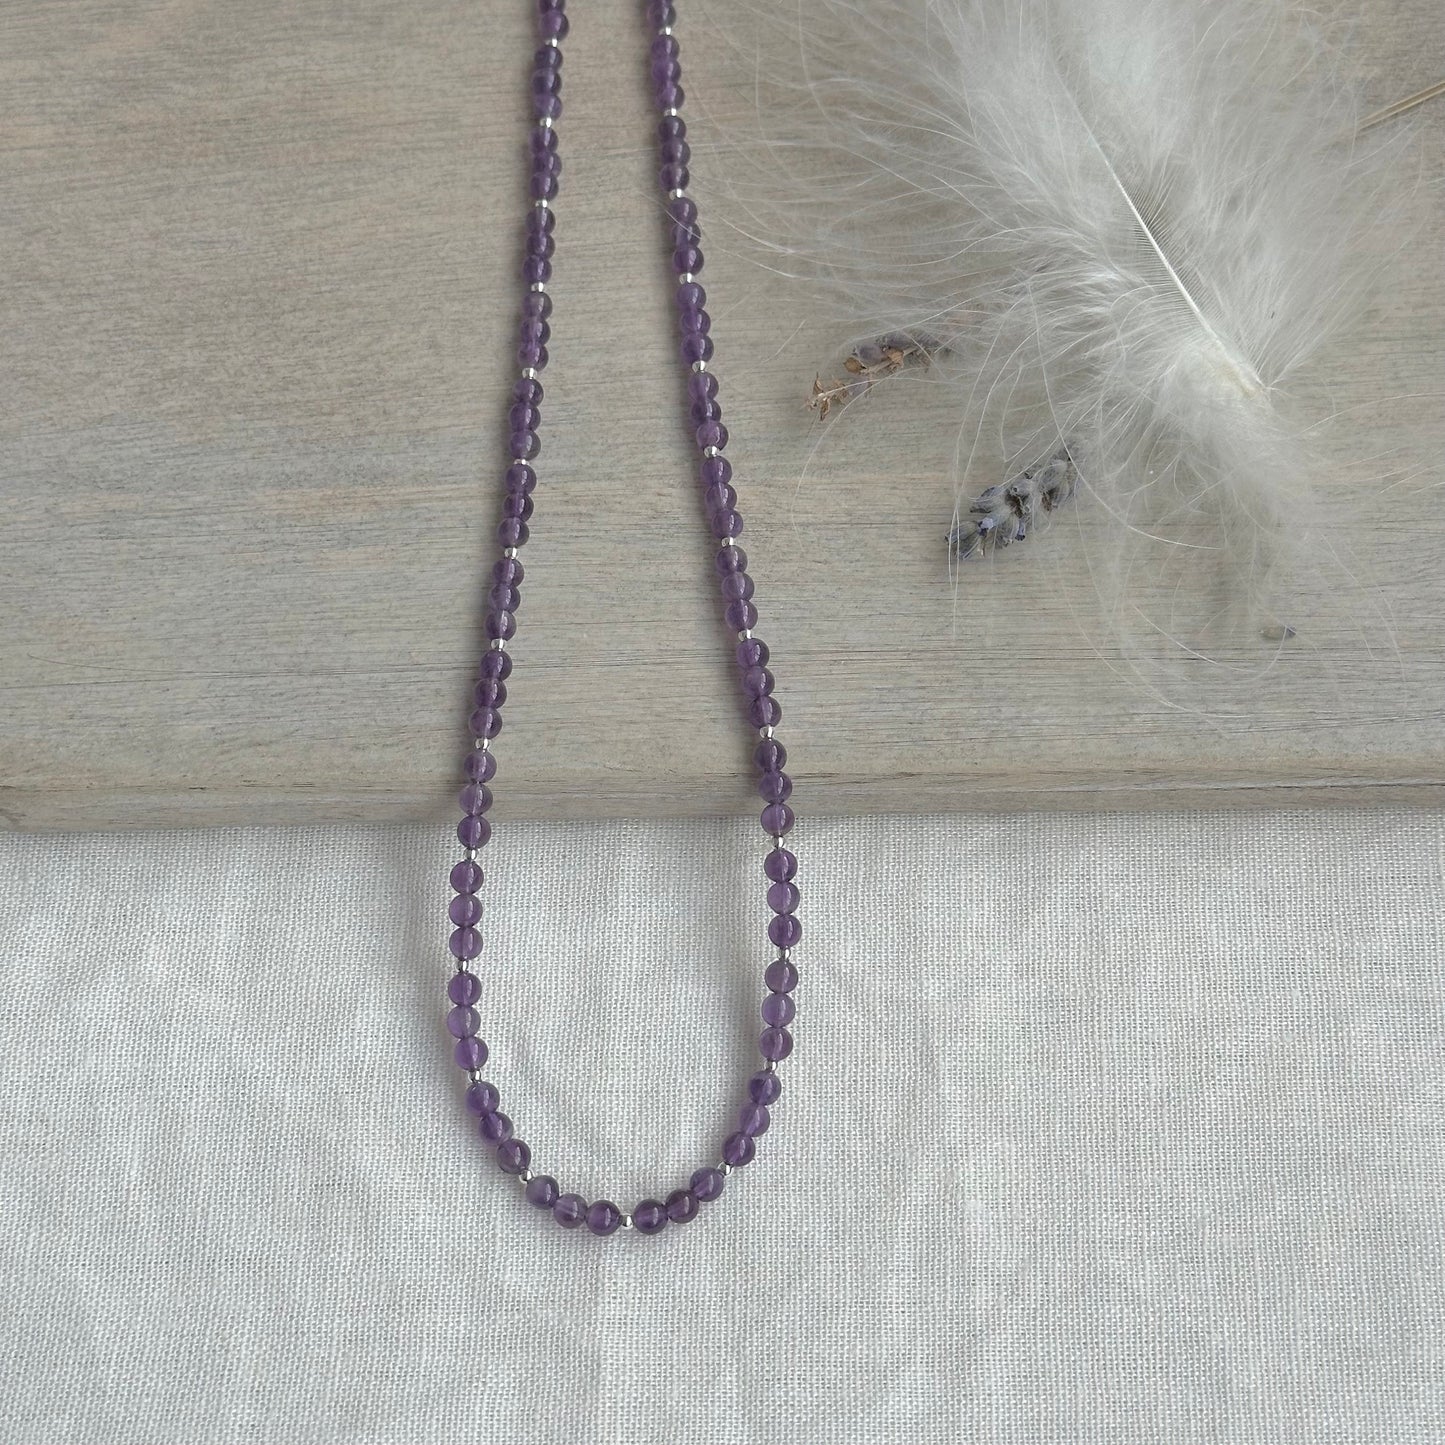 Amethyst Bead Necklace with February Birthstone, sterling silver finish